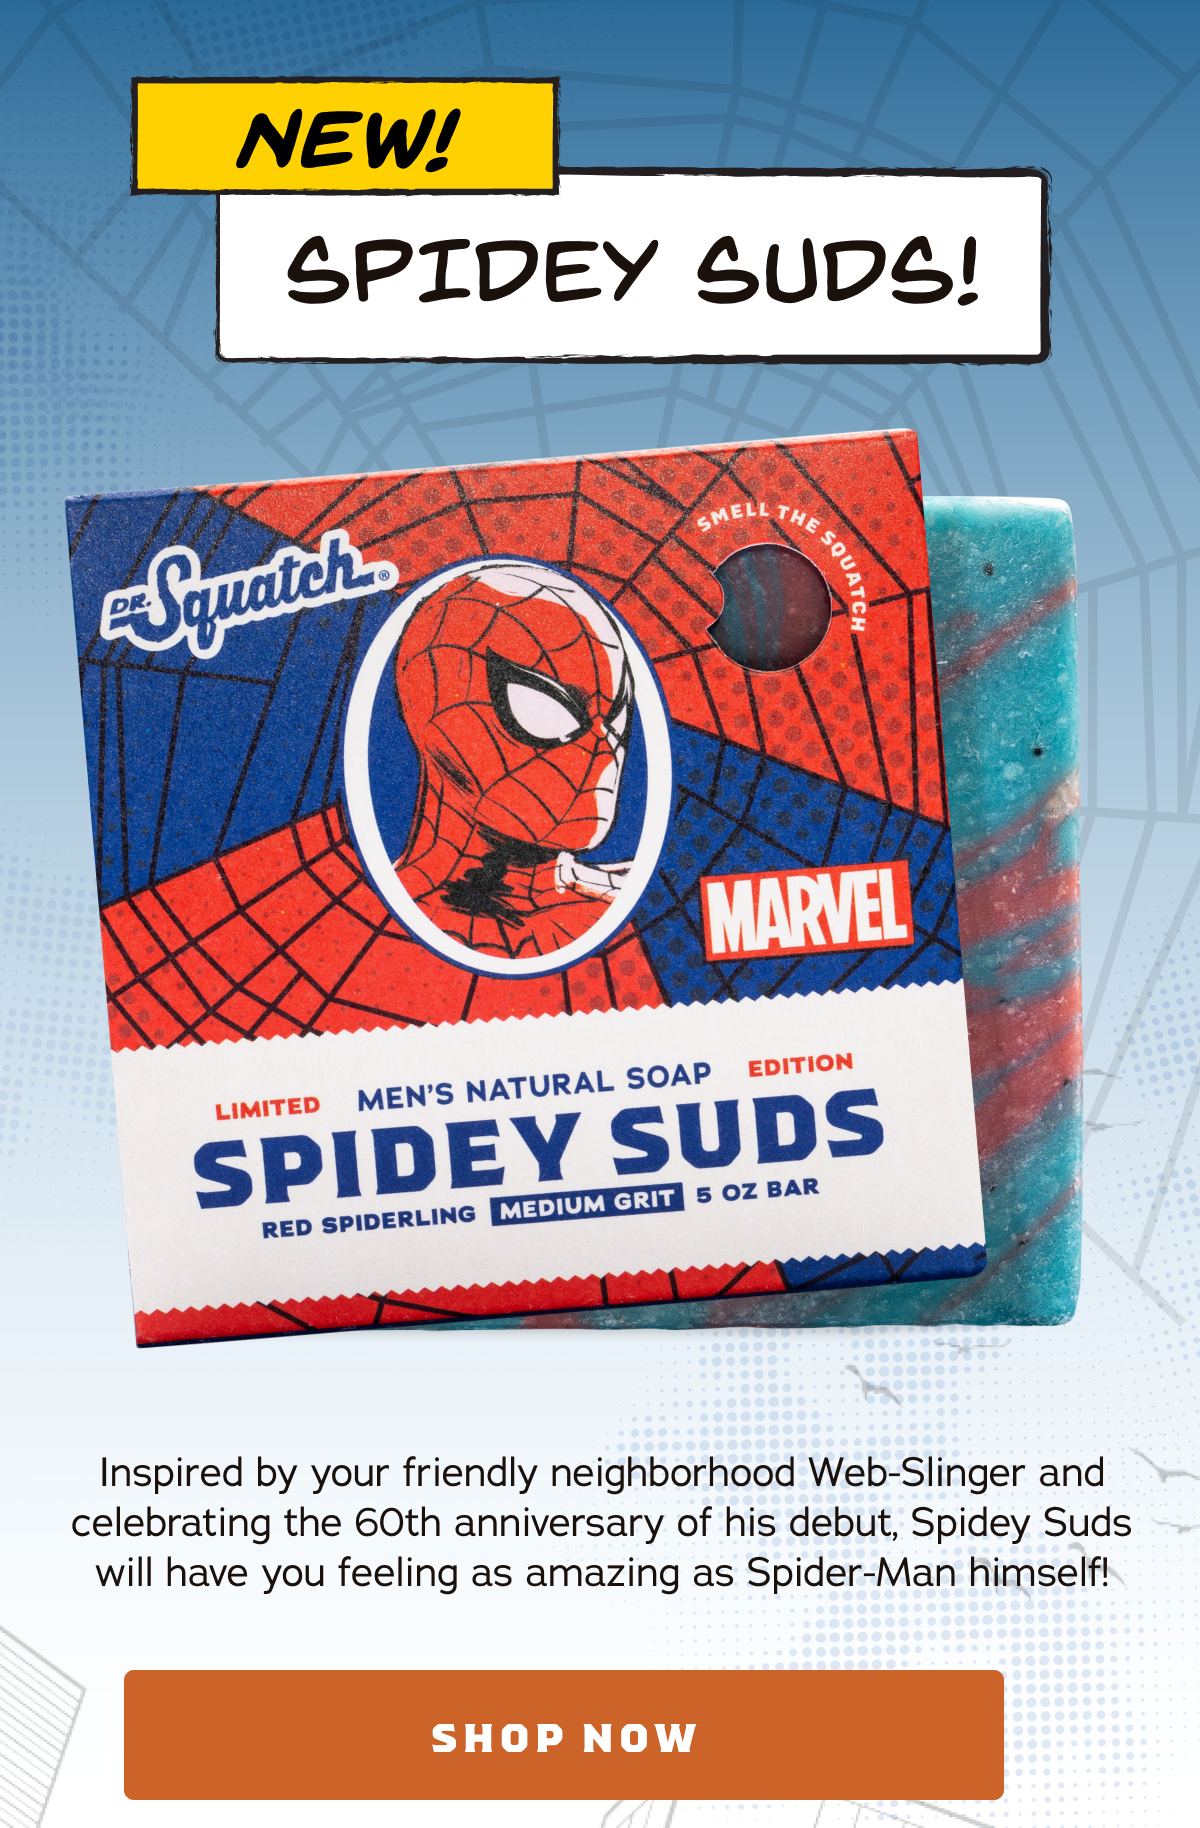 Unboxing the new Spidey Suds bricc from Dr. Squatch Get yours today